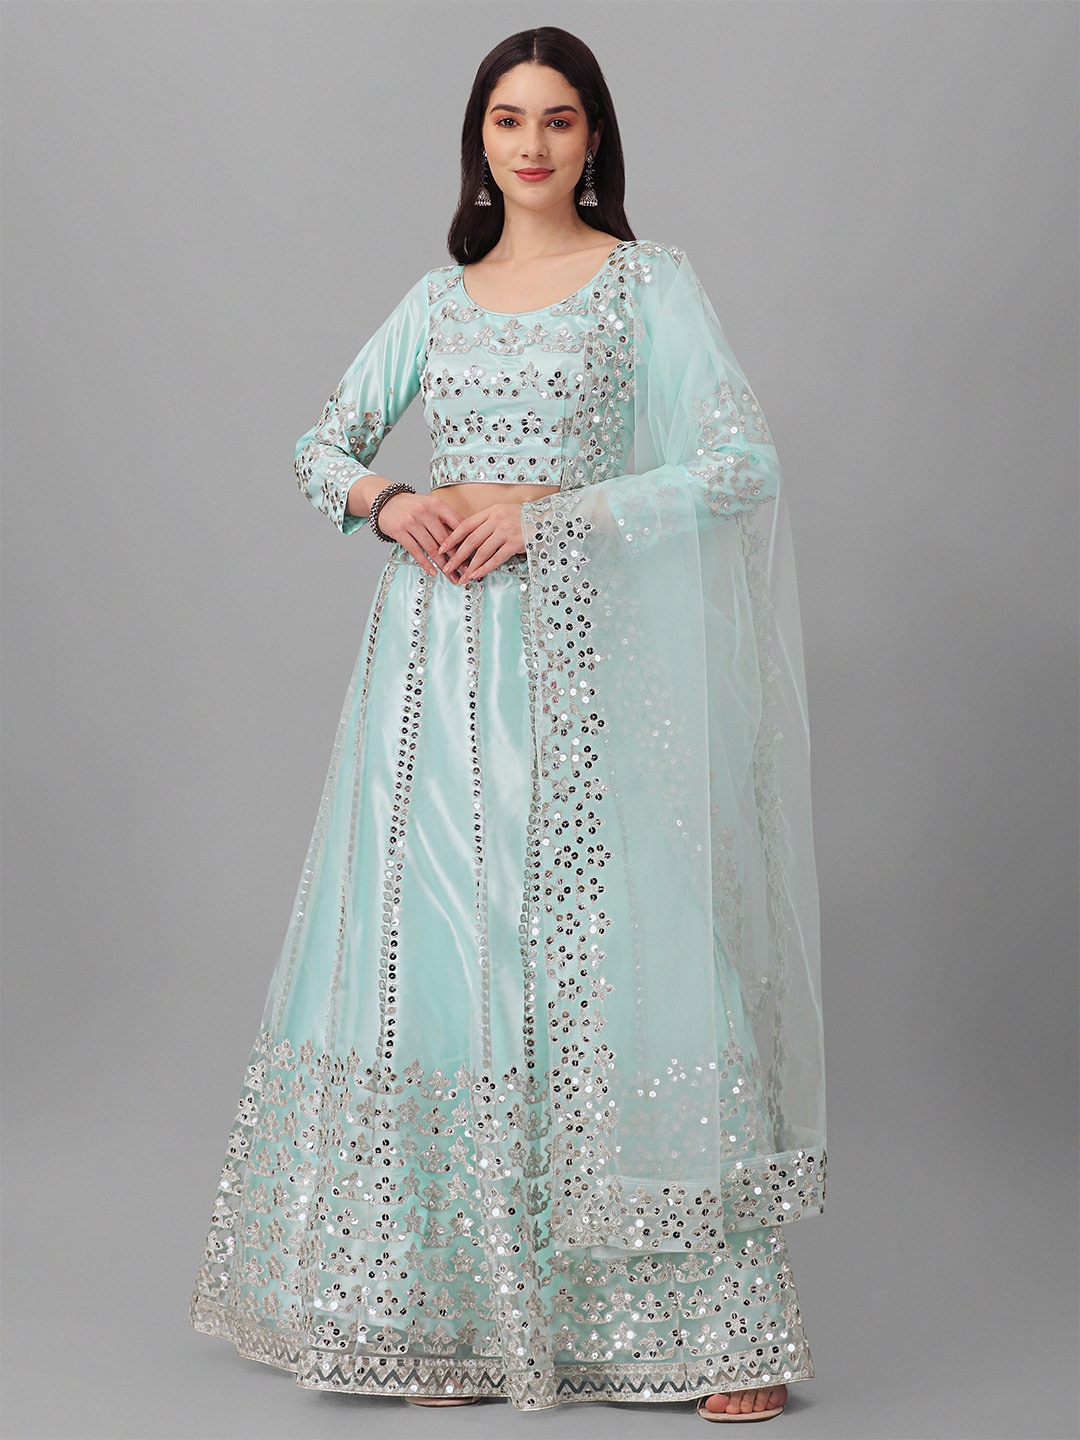 Divyadham Textiles Embroidered Sequinned Semi-Stitched Lehenga & Unstitched Blouse With Dupatta Price in India